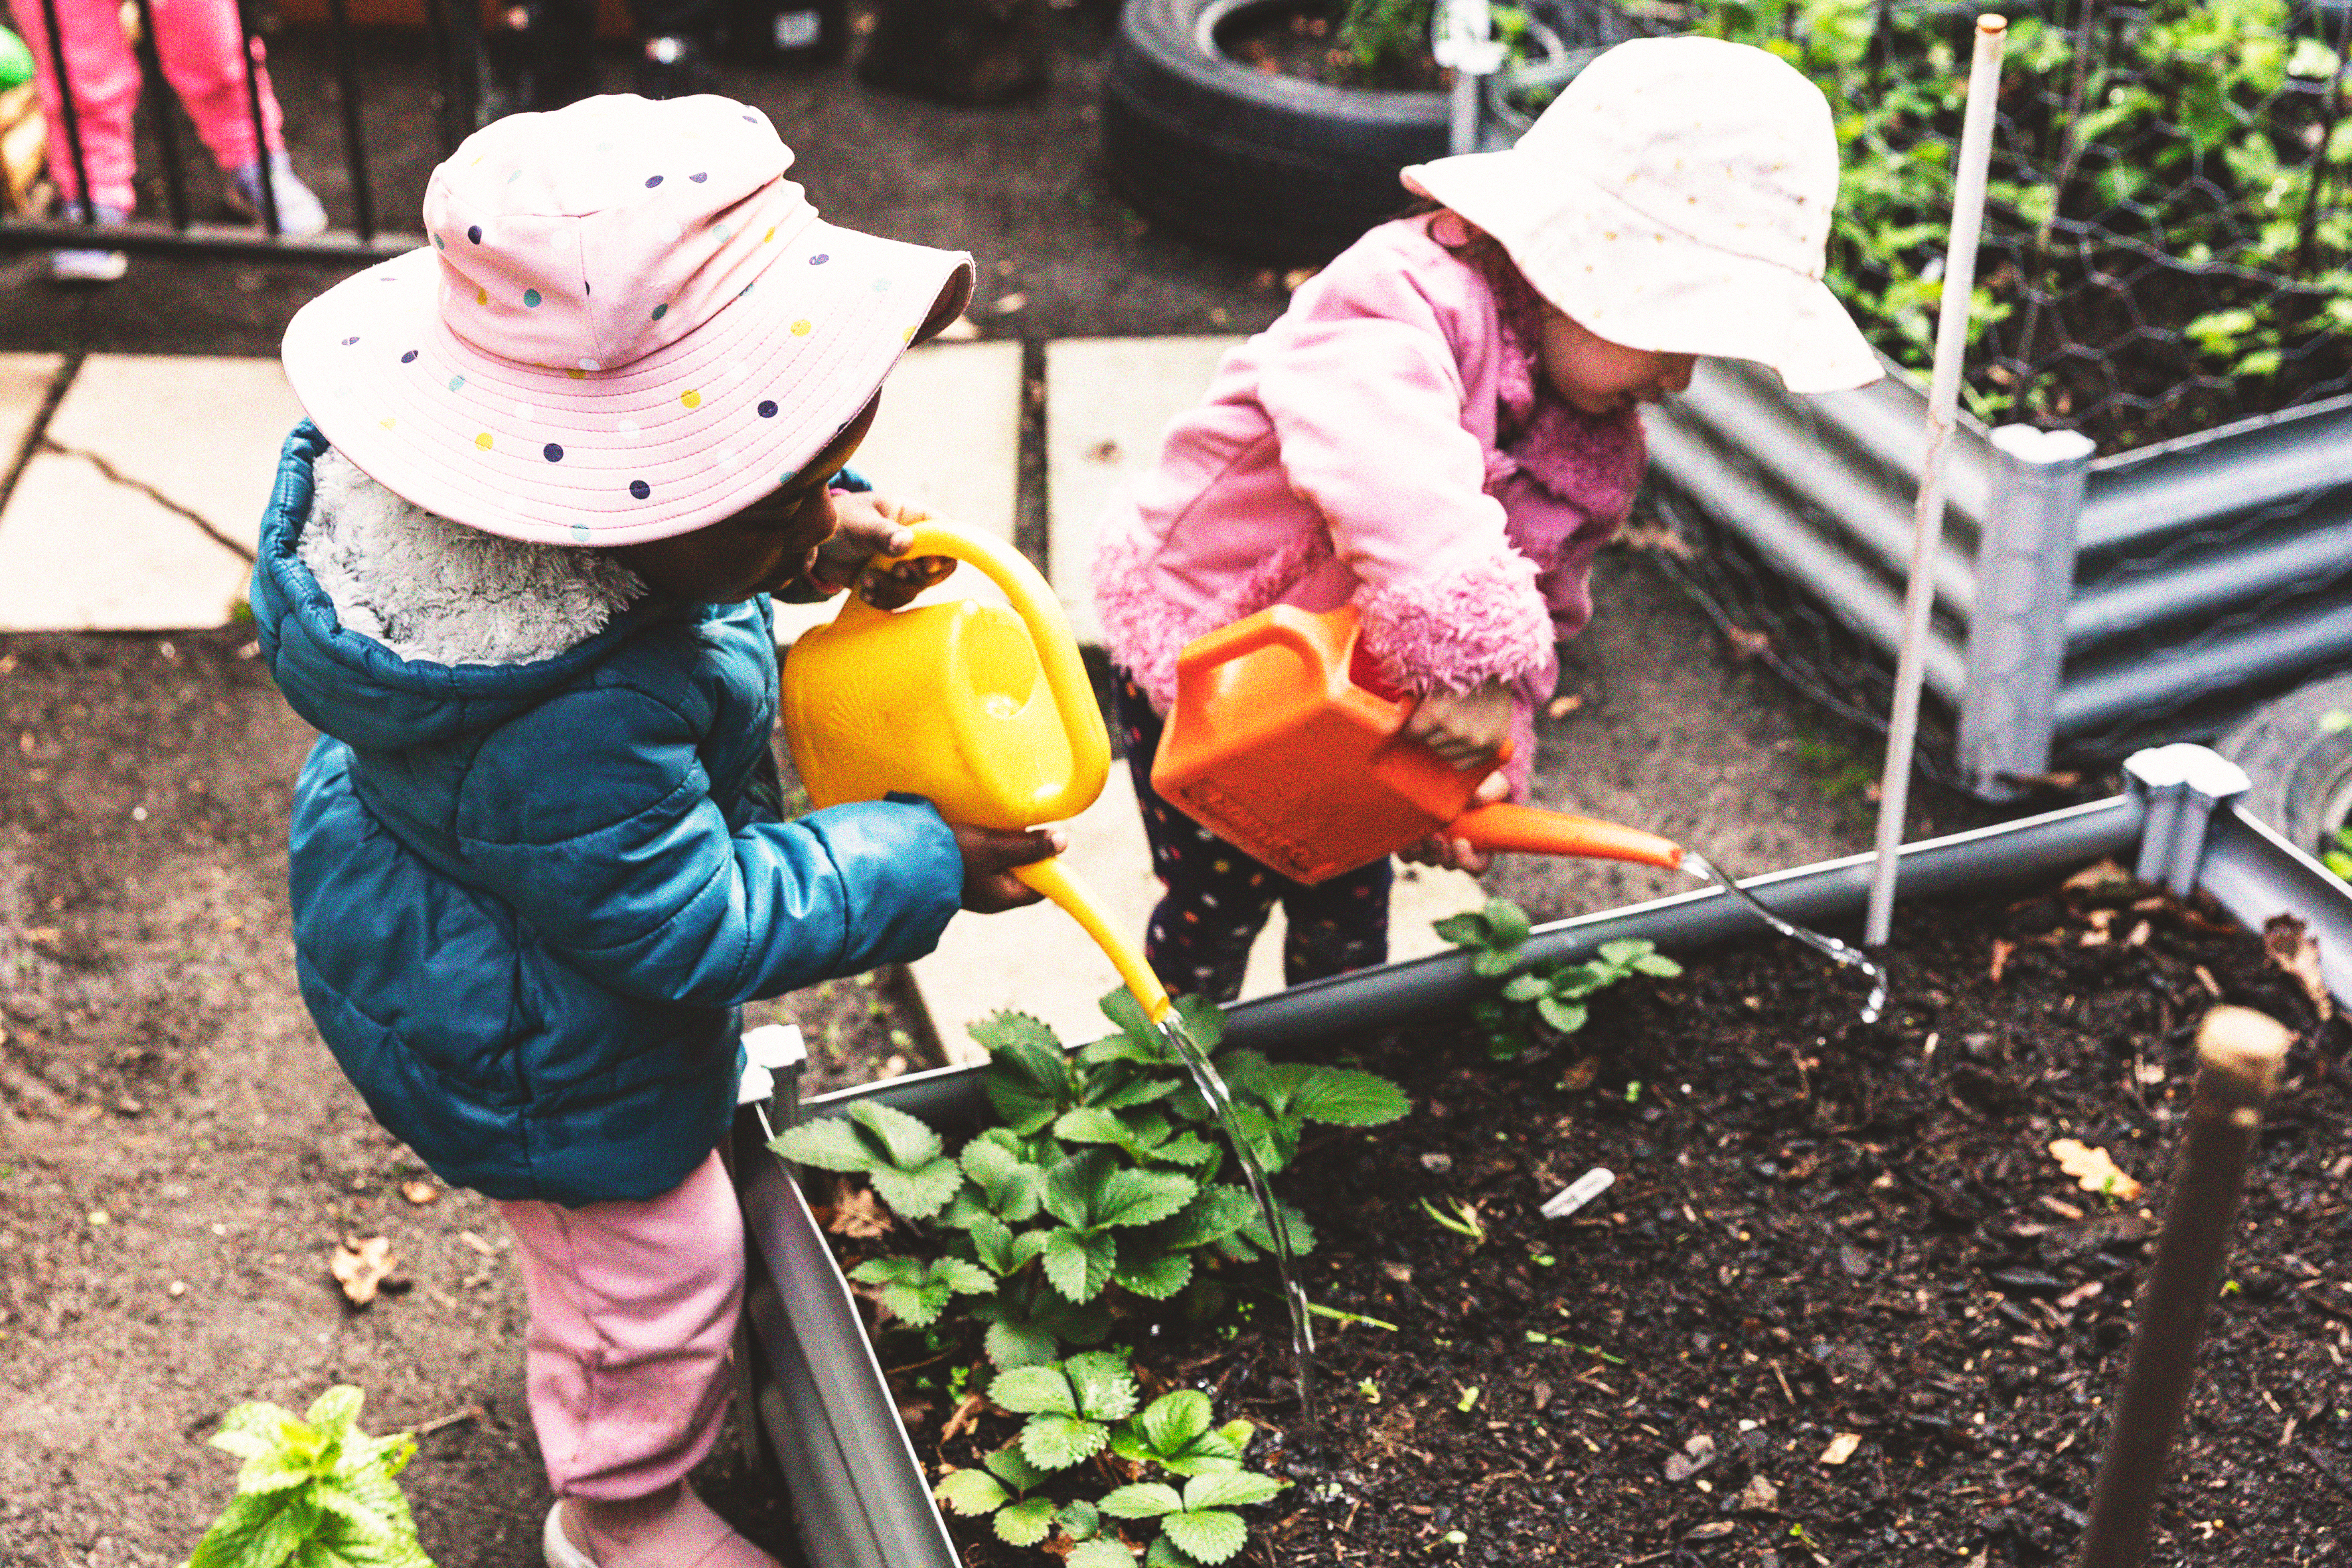 Two young children watering plants